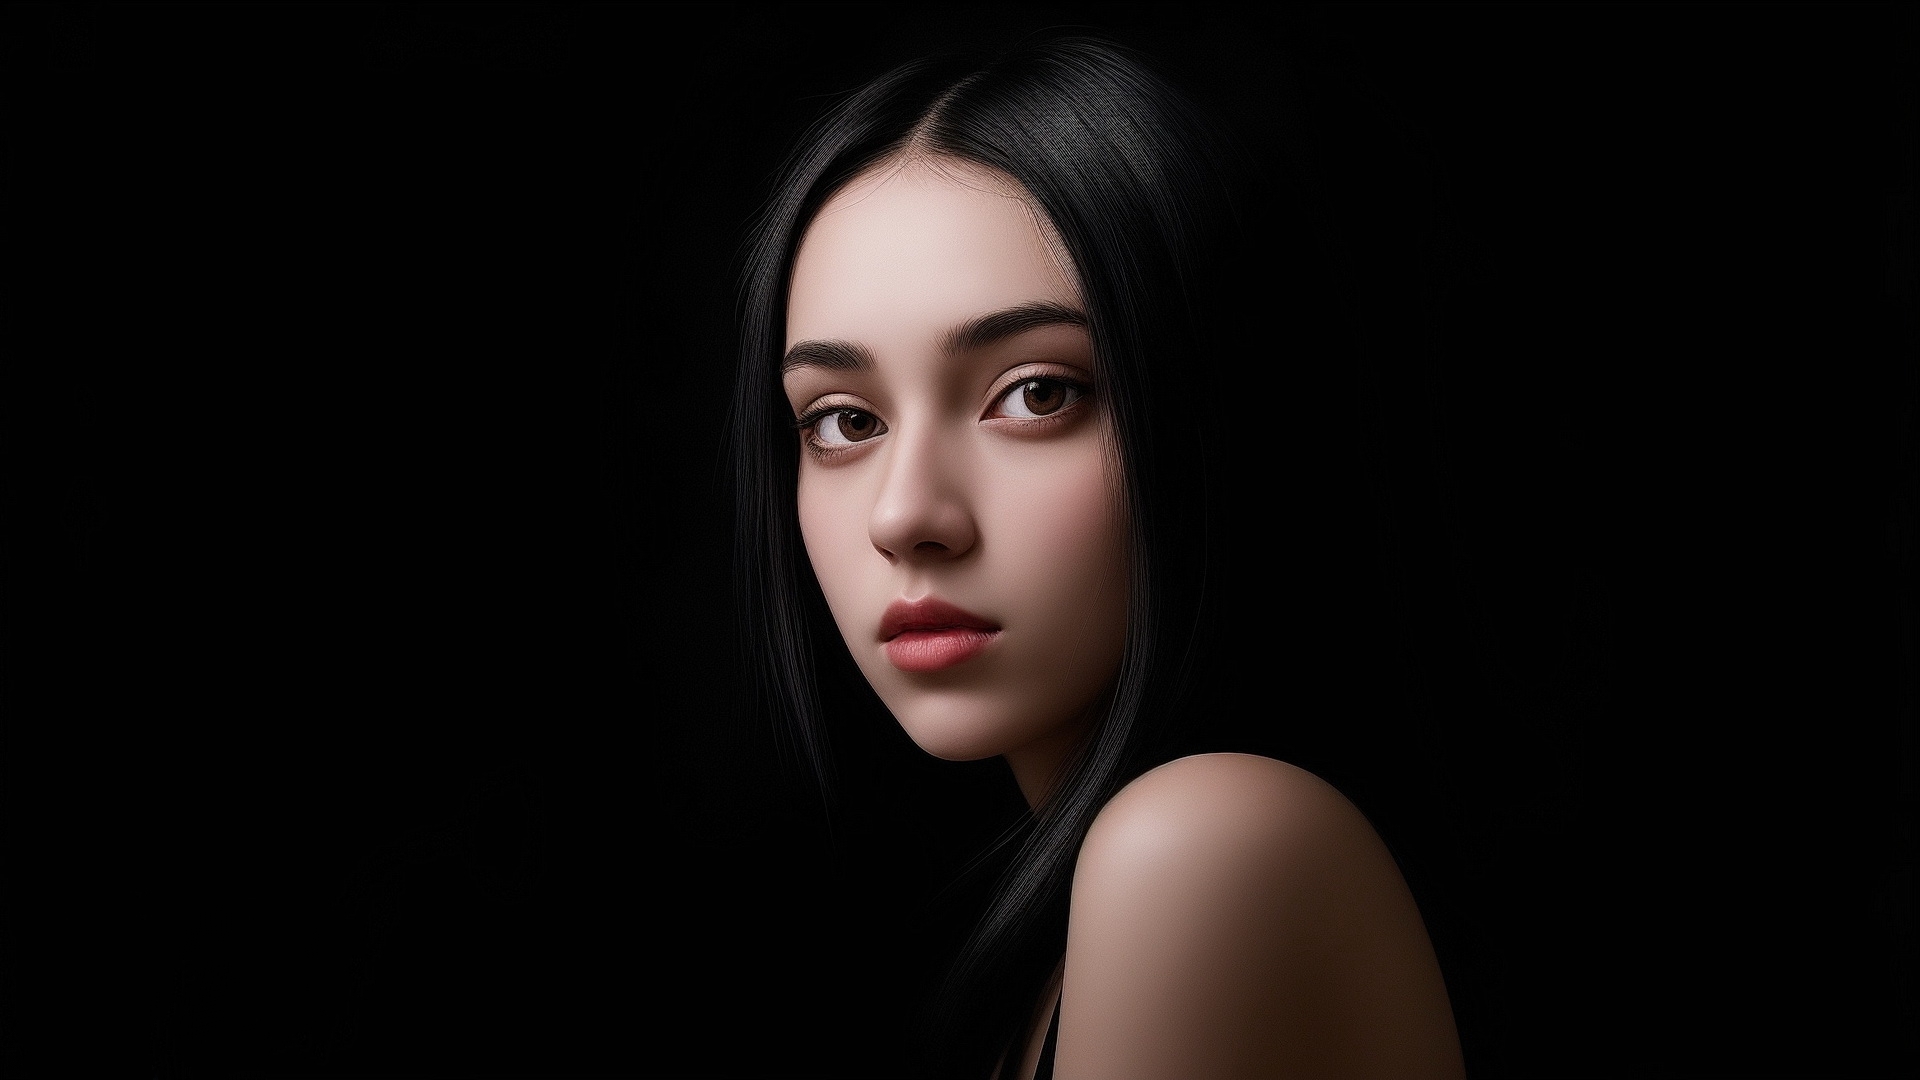 Portrait of a black-haired girl on a black background